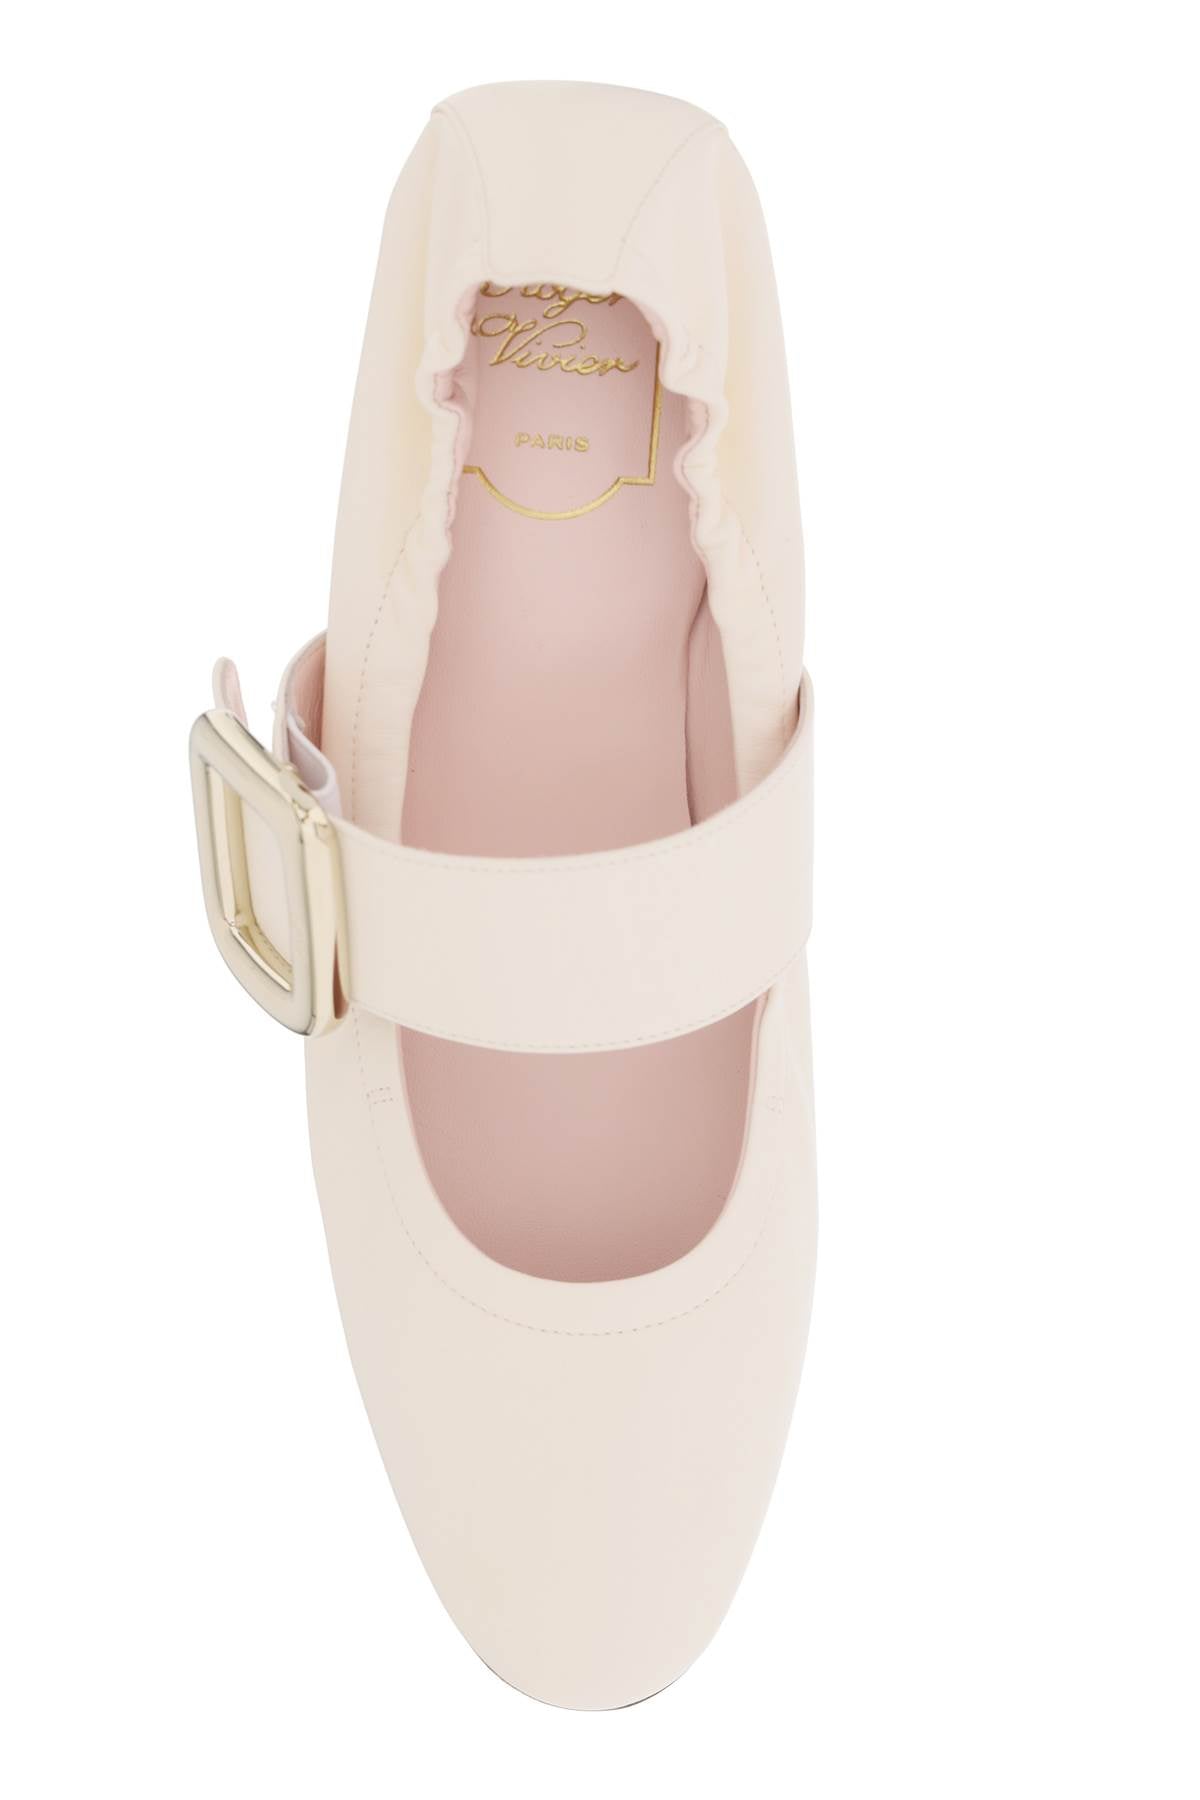 ROGER VIVIER Classic White Leather Ballerina Flats for Women – Perfect for FW23!